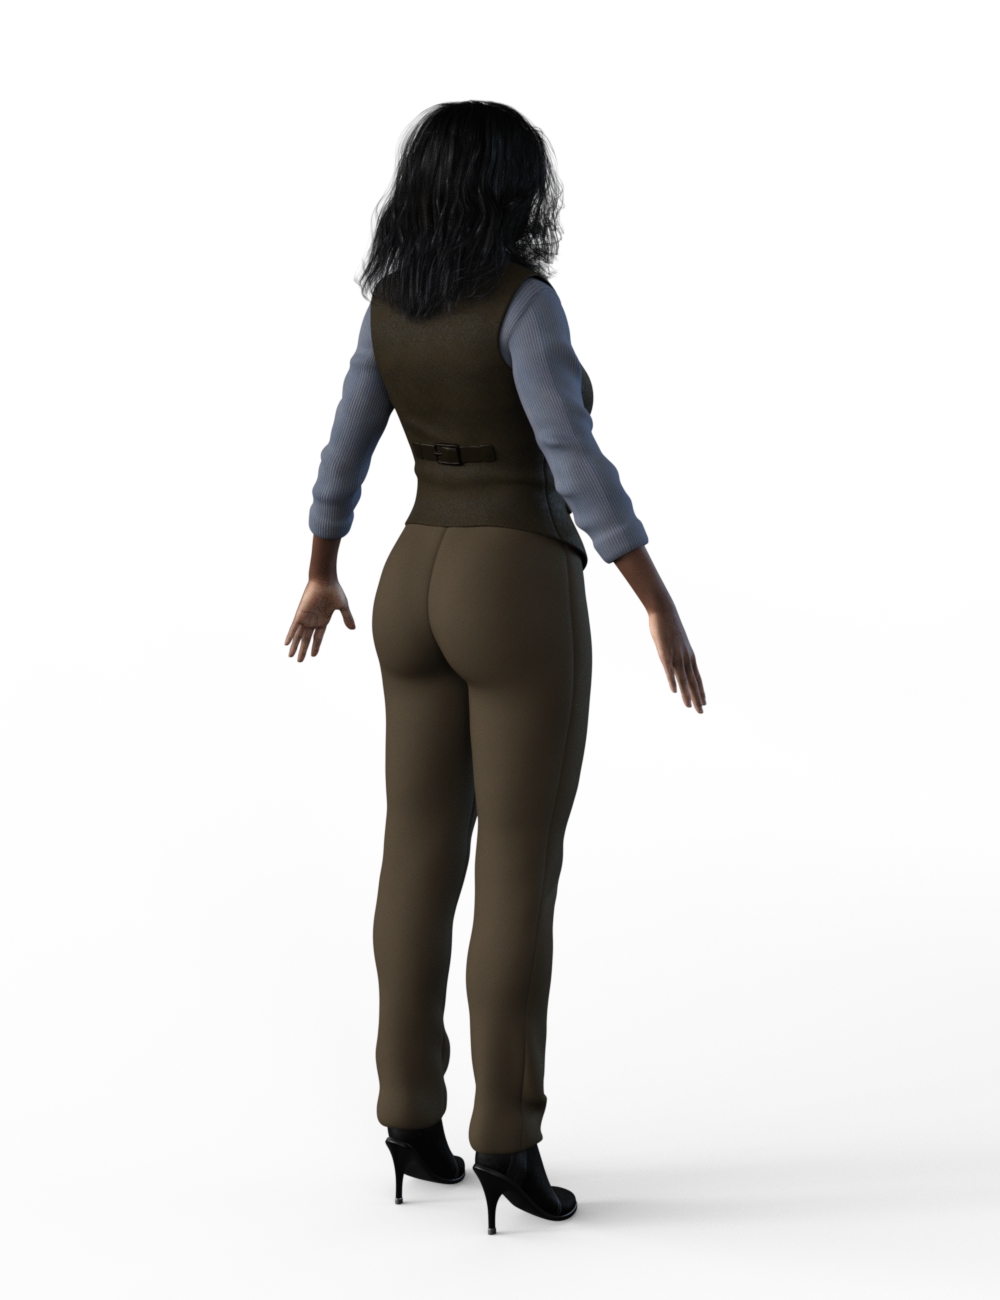 FBX- Lynsey Casual Style by: Paleo, 3D Models by Daz 3D